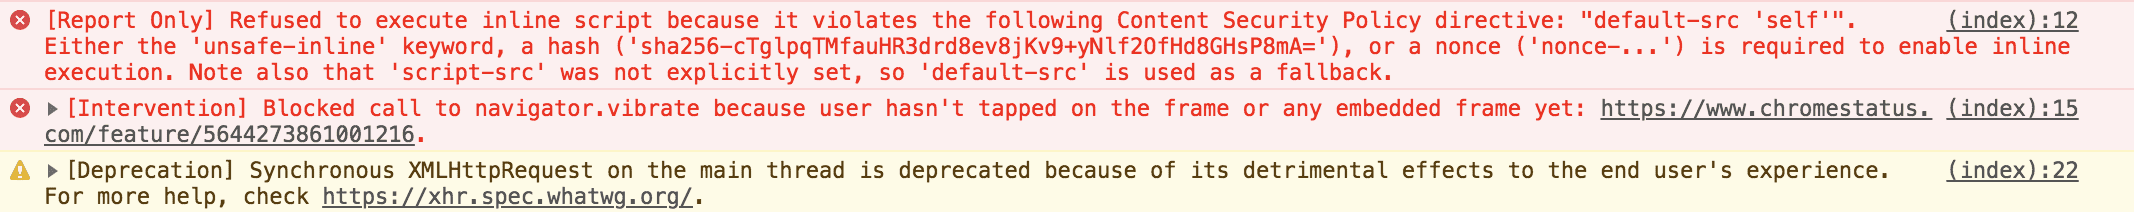 DevTools console warnings for deprecations and interventions.